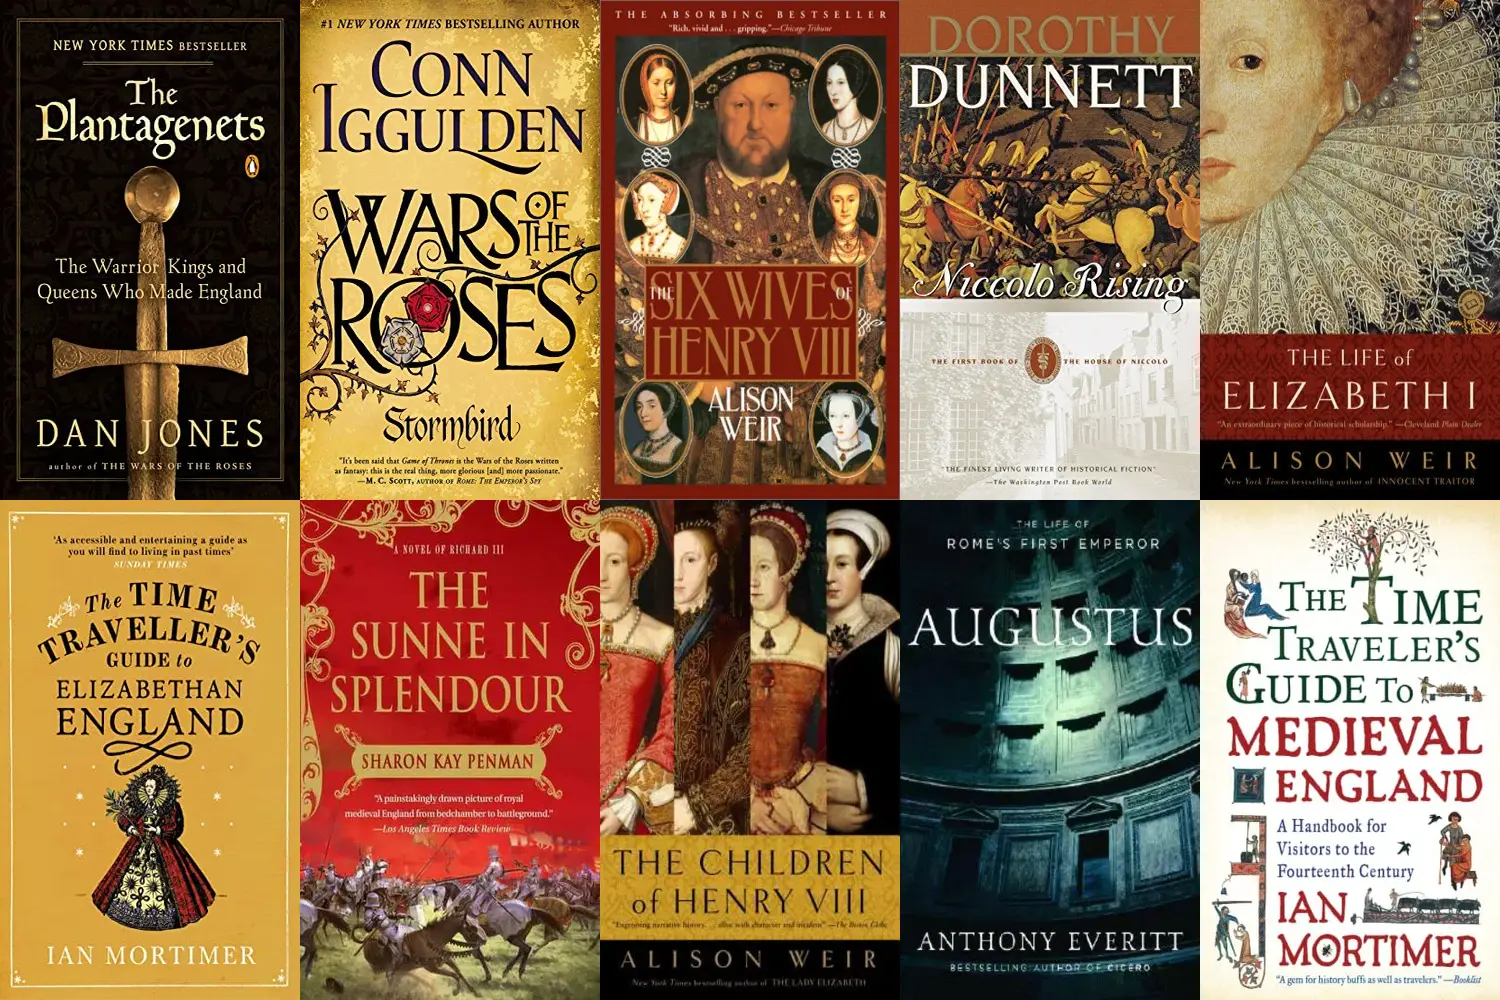 The Wars of the Roses: The Fall of the Plantagenets and the Rise of the  Tudors by Dan Jones